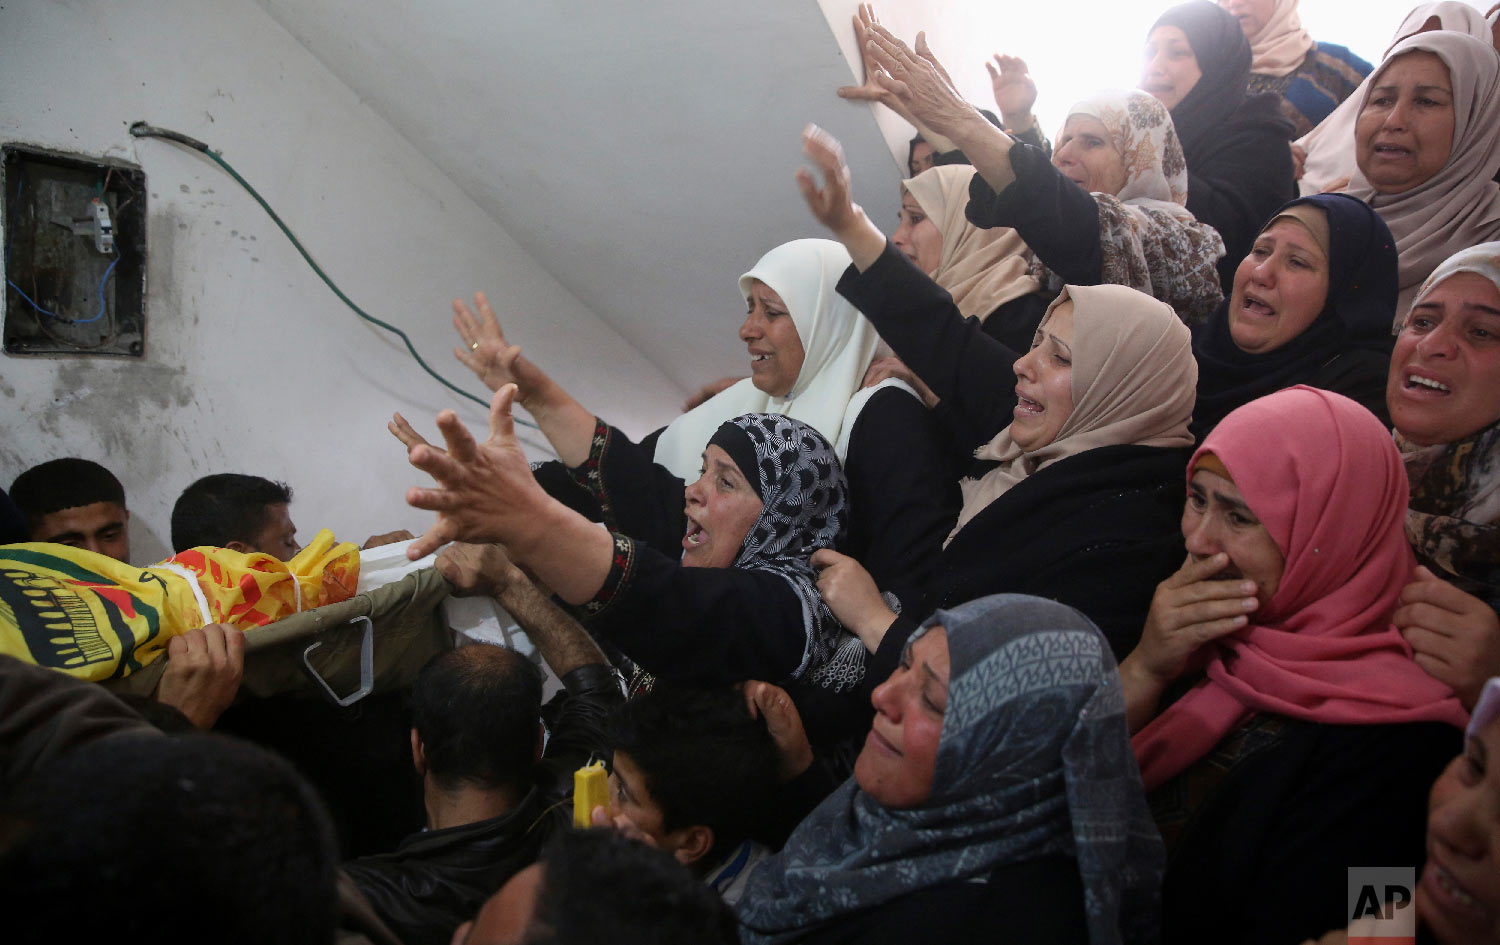  Relatives mourn over the body of Hamdan Abu Amsha, 23, during his funeral at the family house in Beit Hanoun, Gaza Strip, Saturday, March 31, 2018. Israel will target "terror organizations" in Gaza if violence along the territory's border with Israe